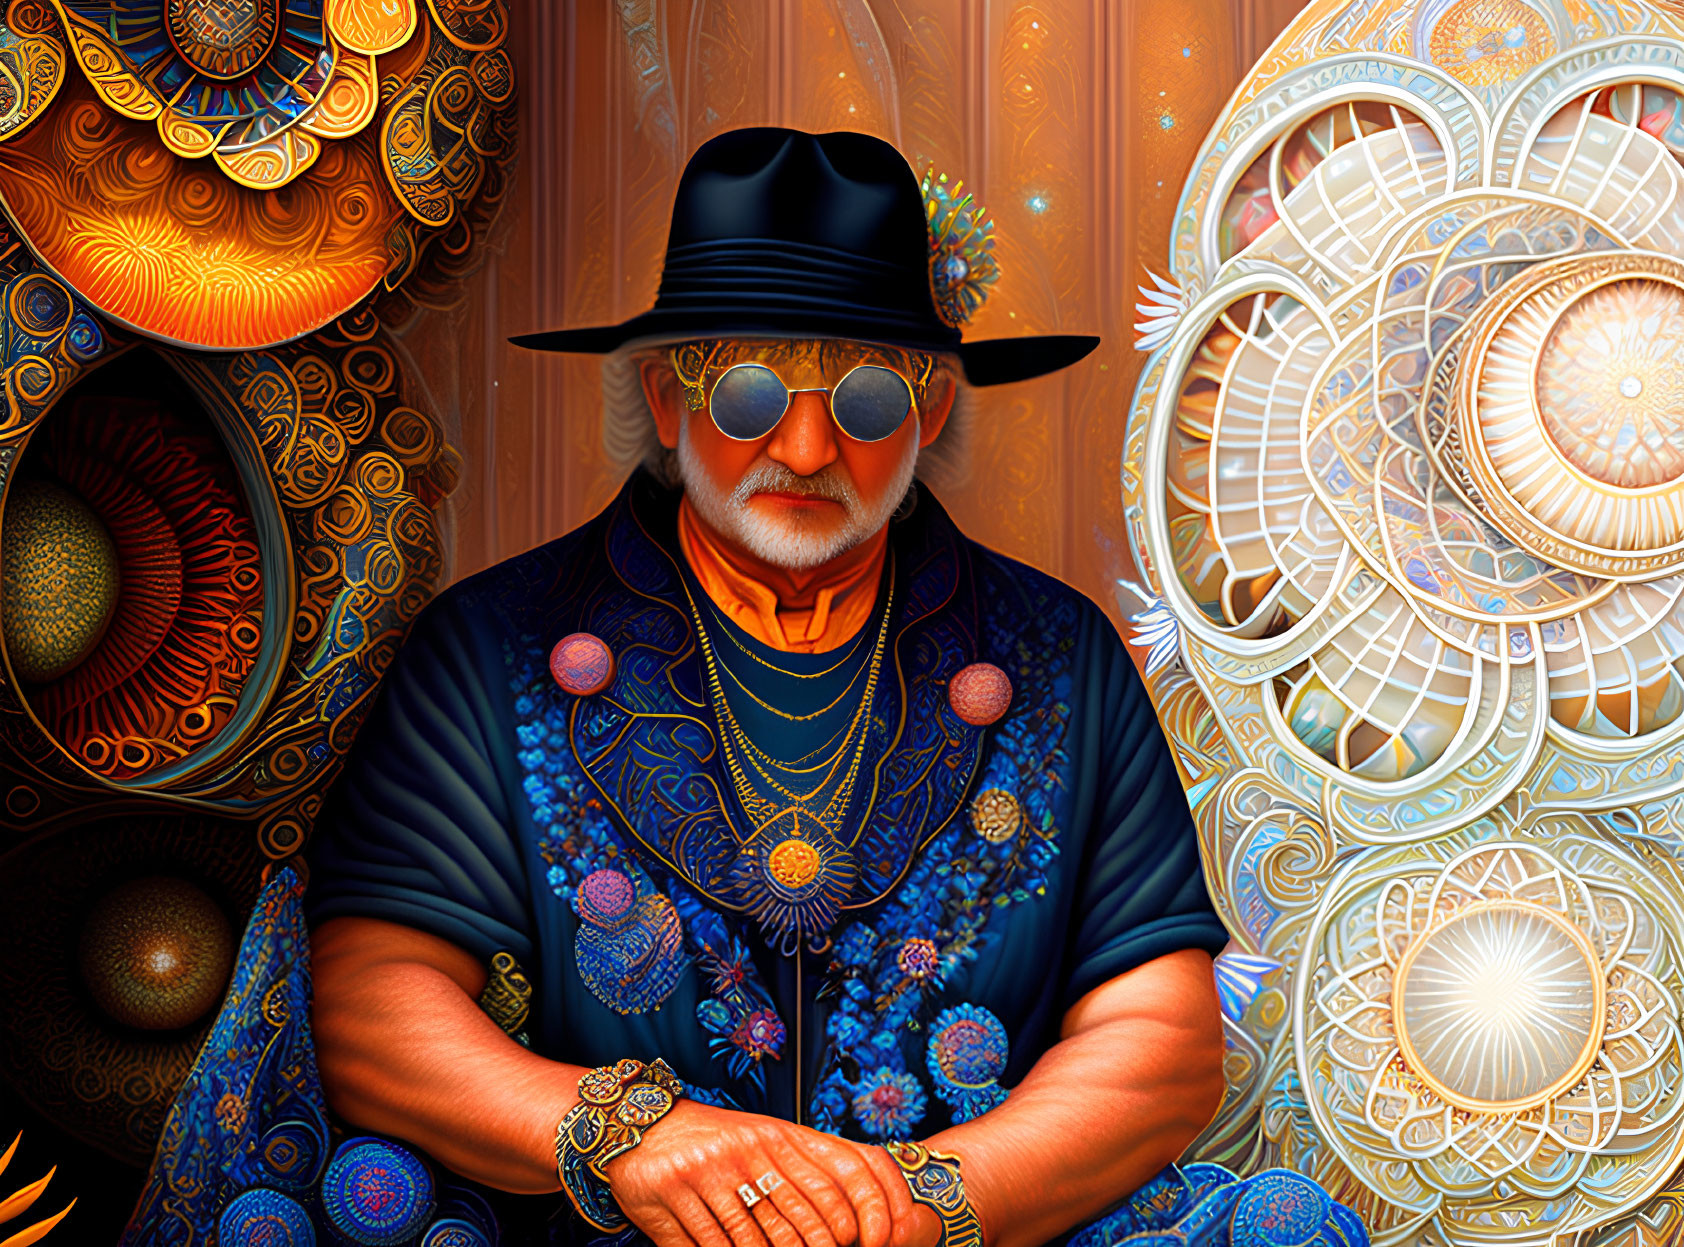 Man in Sunglasses and Hat Surrounded by Colorful Fractal Patterns